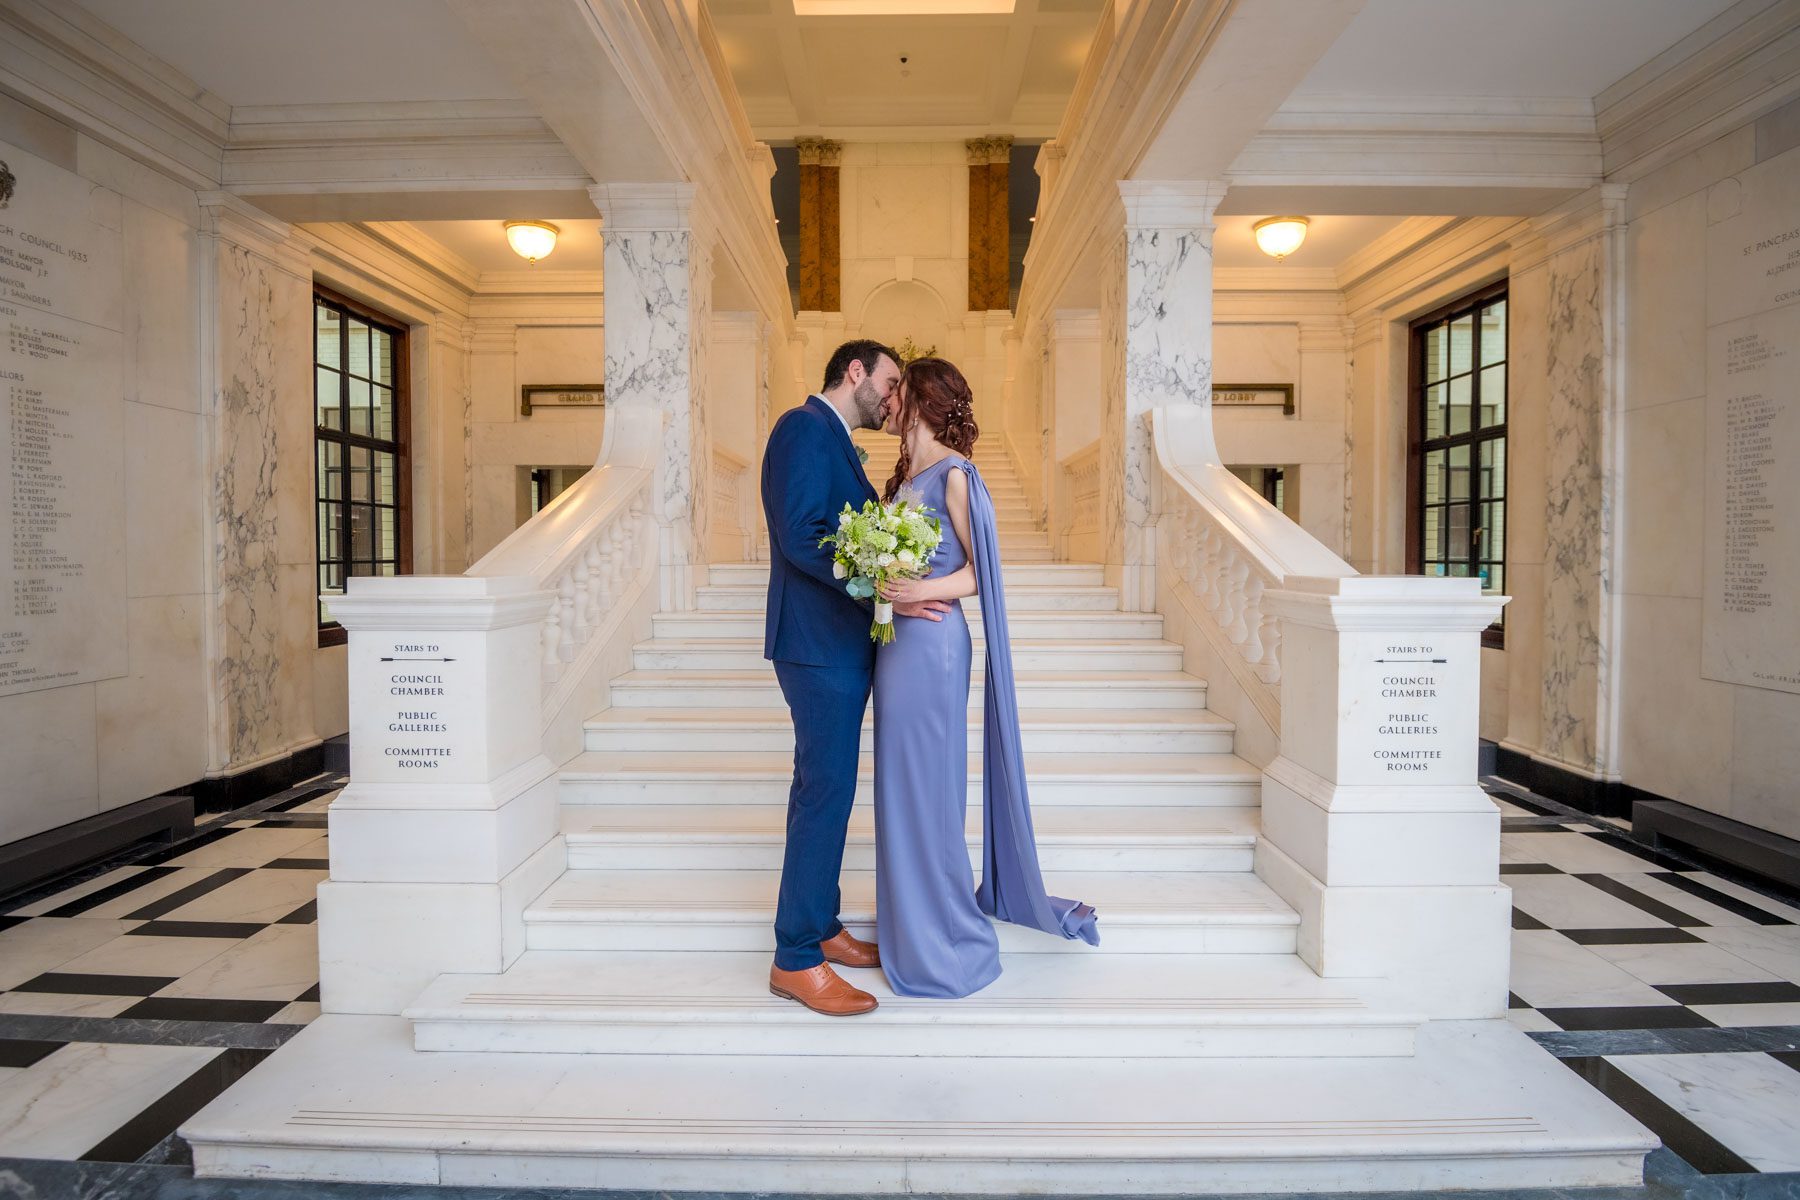 Newlyweds kissing at the foot of the Marble Staircase at Camden Town Hall